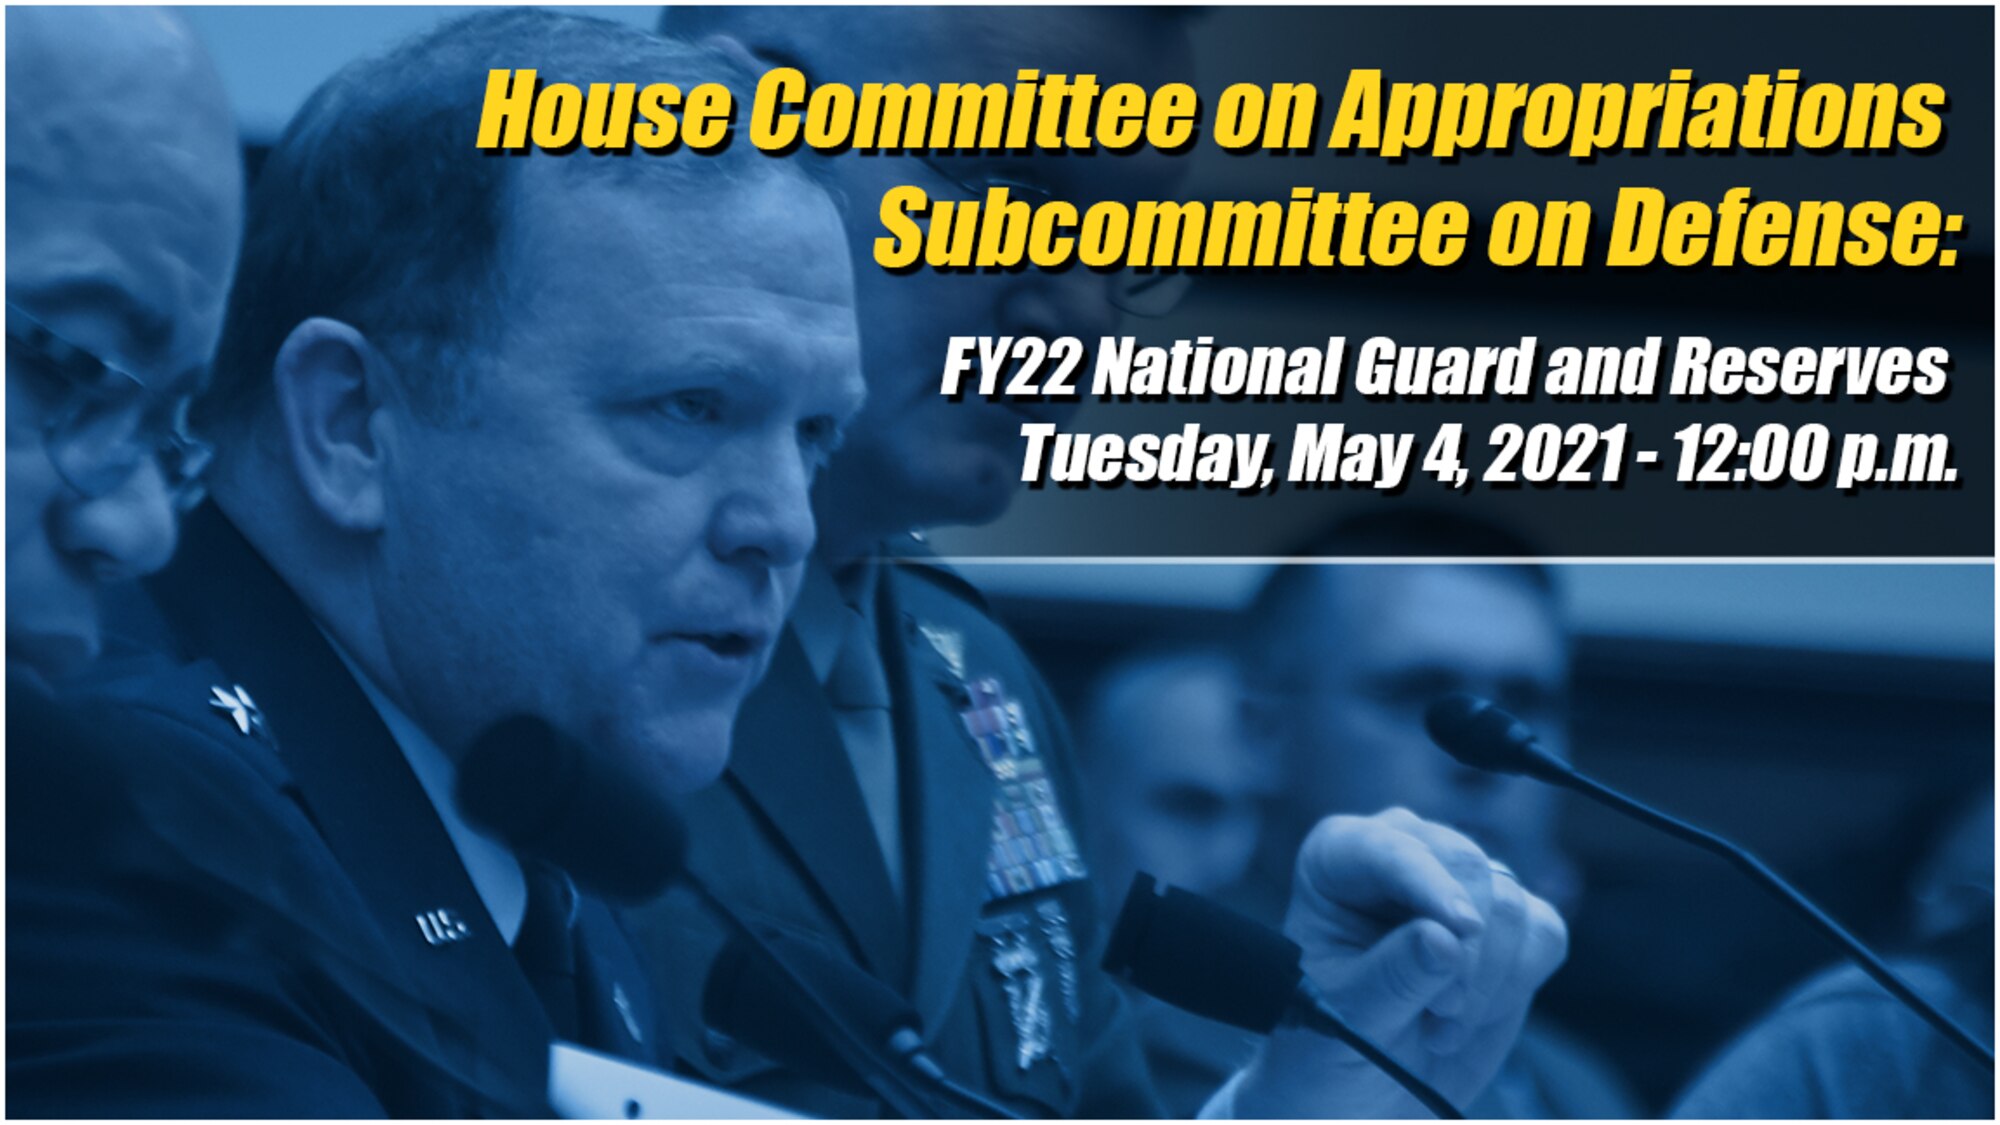 House Committee on Appropriations Subcommittee on Defense today, May 4 at noon.